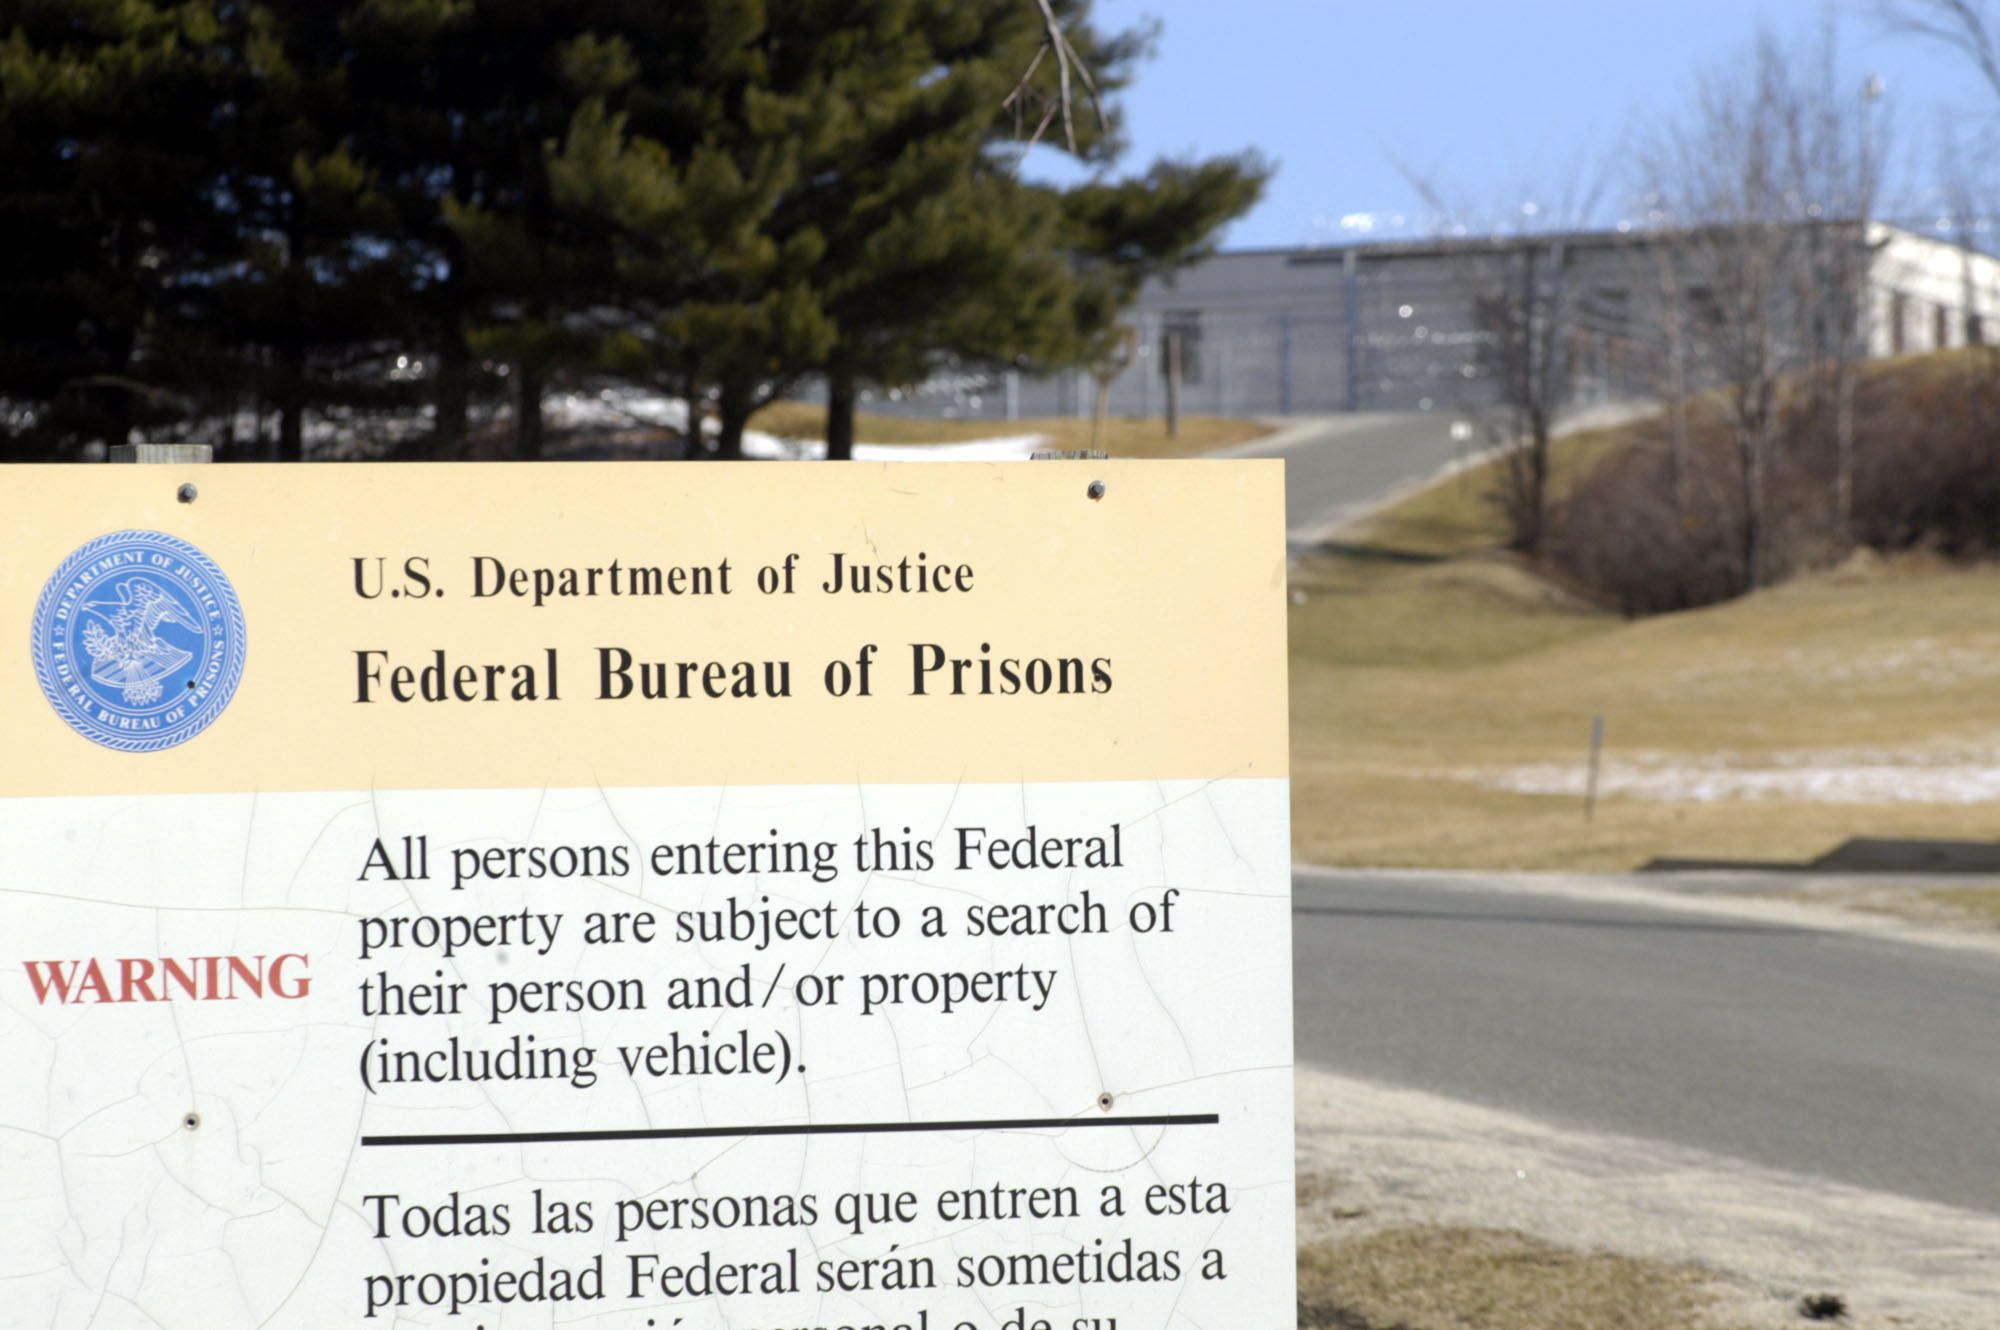 UNITED STATES - MARCH 11:  The federal prison at Danbury, Connecticut is pictured on Thursday, March 11, 2004. Martha Stewart, convicted of obstructing a U.S. investigation of stock she sold, may serve her 10-to-16 month sentence at the facility, about 27 miles form her home in Westport, Connecticut.  (Photo by Chris Ware/Bloomberg via Getty Images) (Bloomberg—Bloomberg via Getty Images)